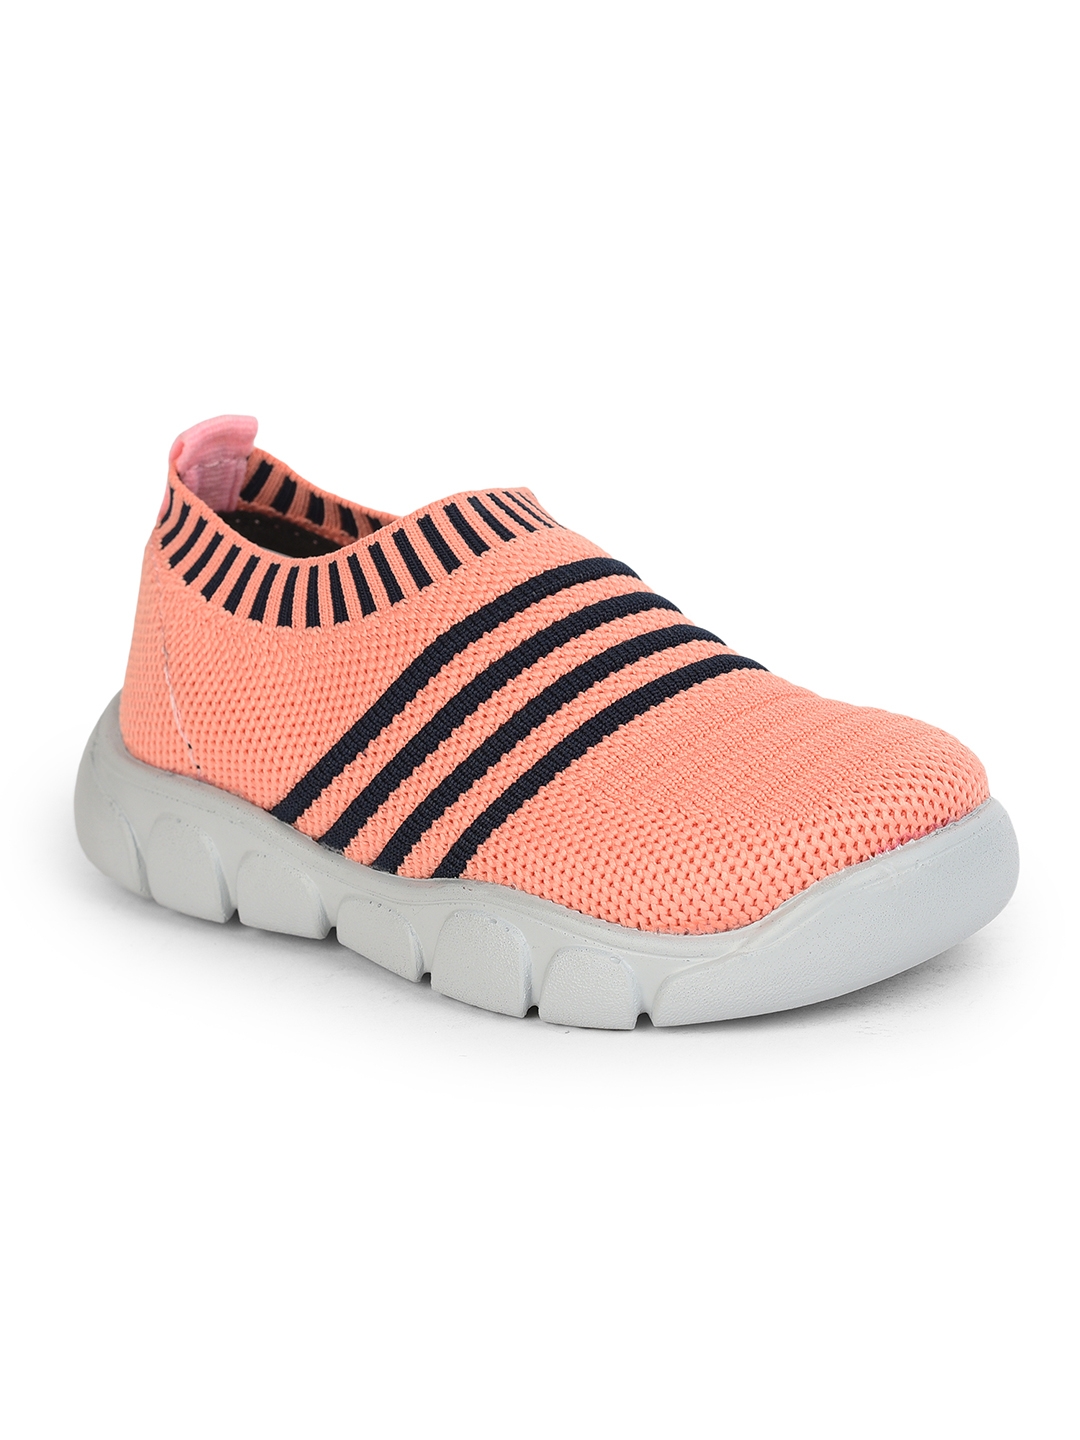 Lucy & Luke by Liberty FLYNN-37 Peach Casual Shoes for Kids